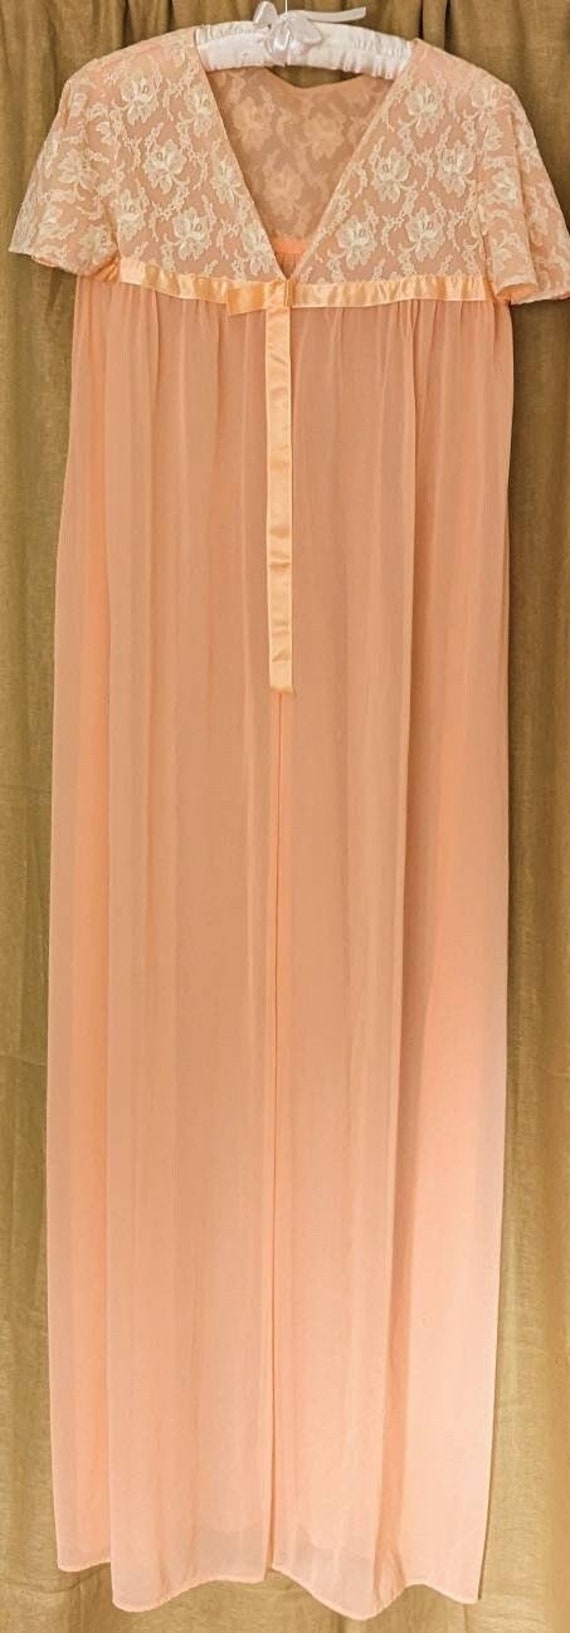 Vintage Negligee Robe Sheer Robe Size XS-S Apricot